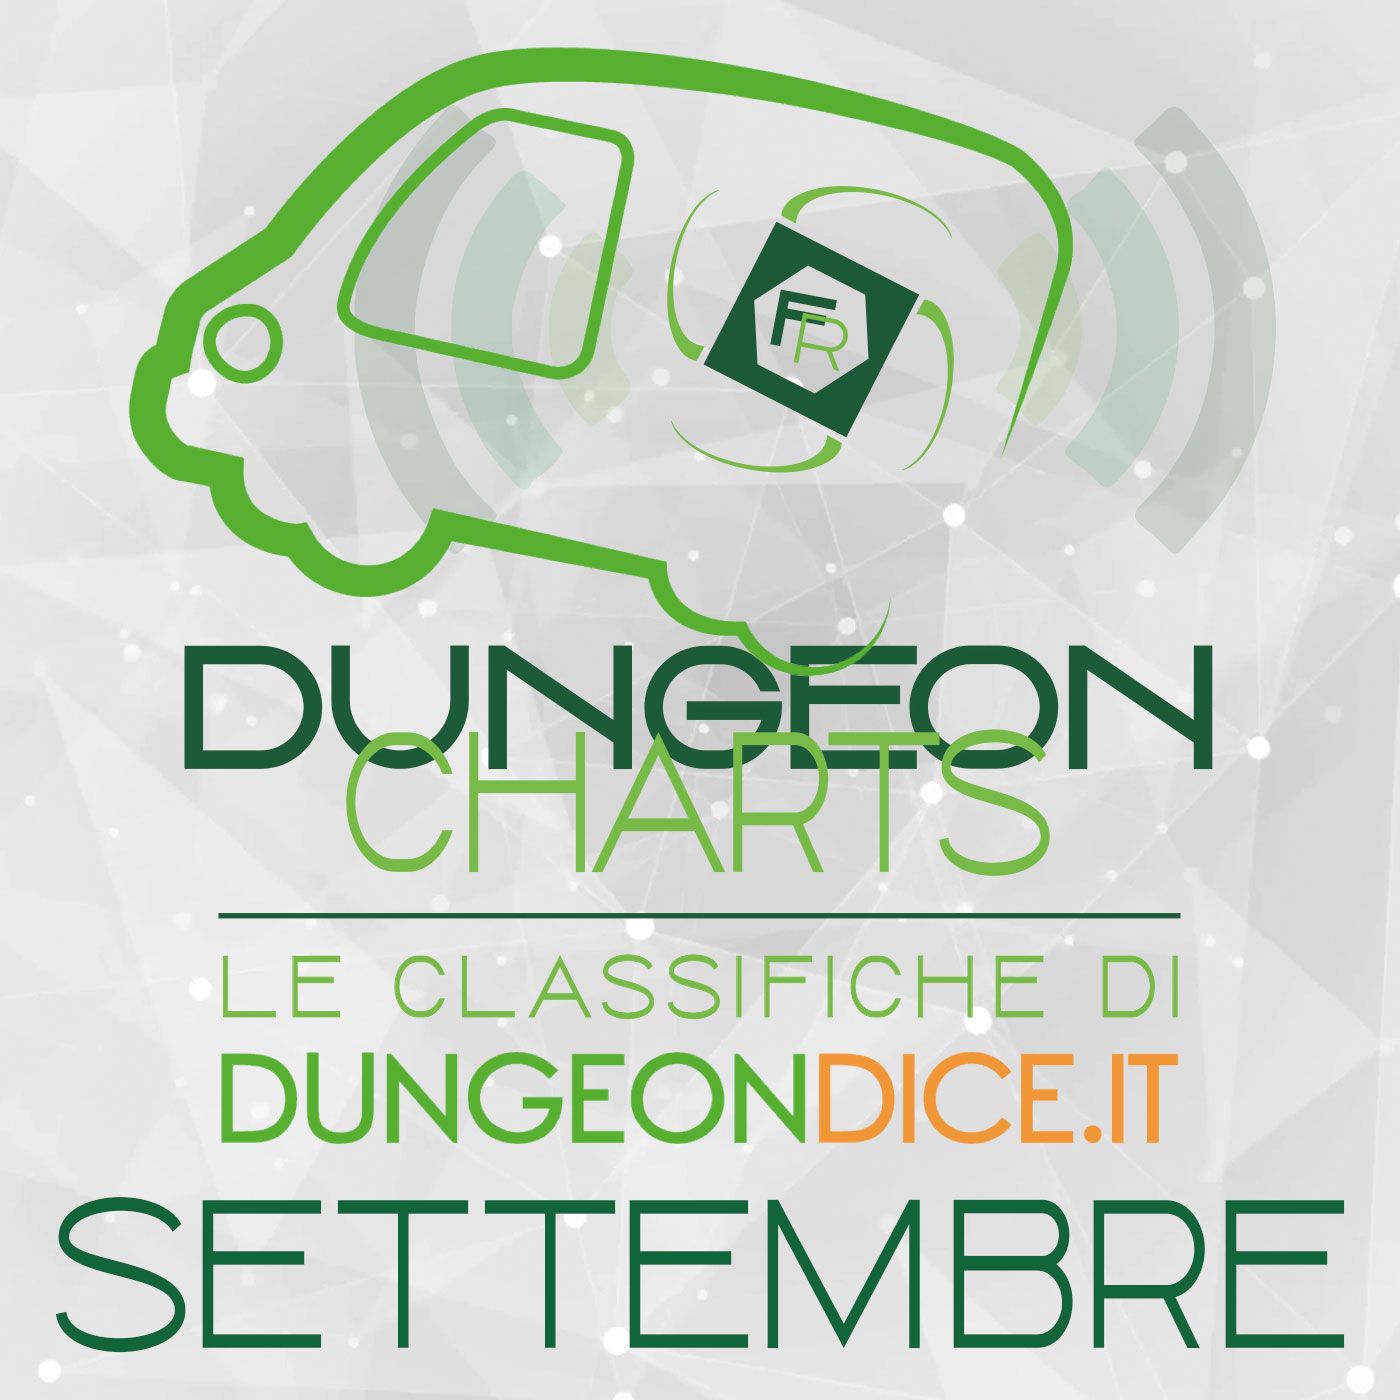 Dungeon Charts - Settembre 2020